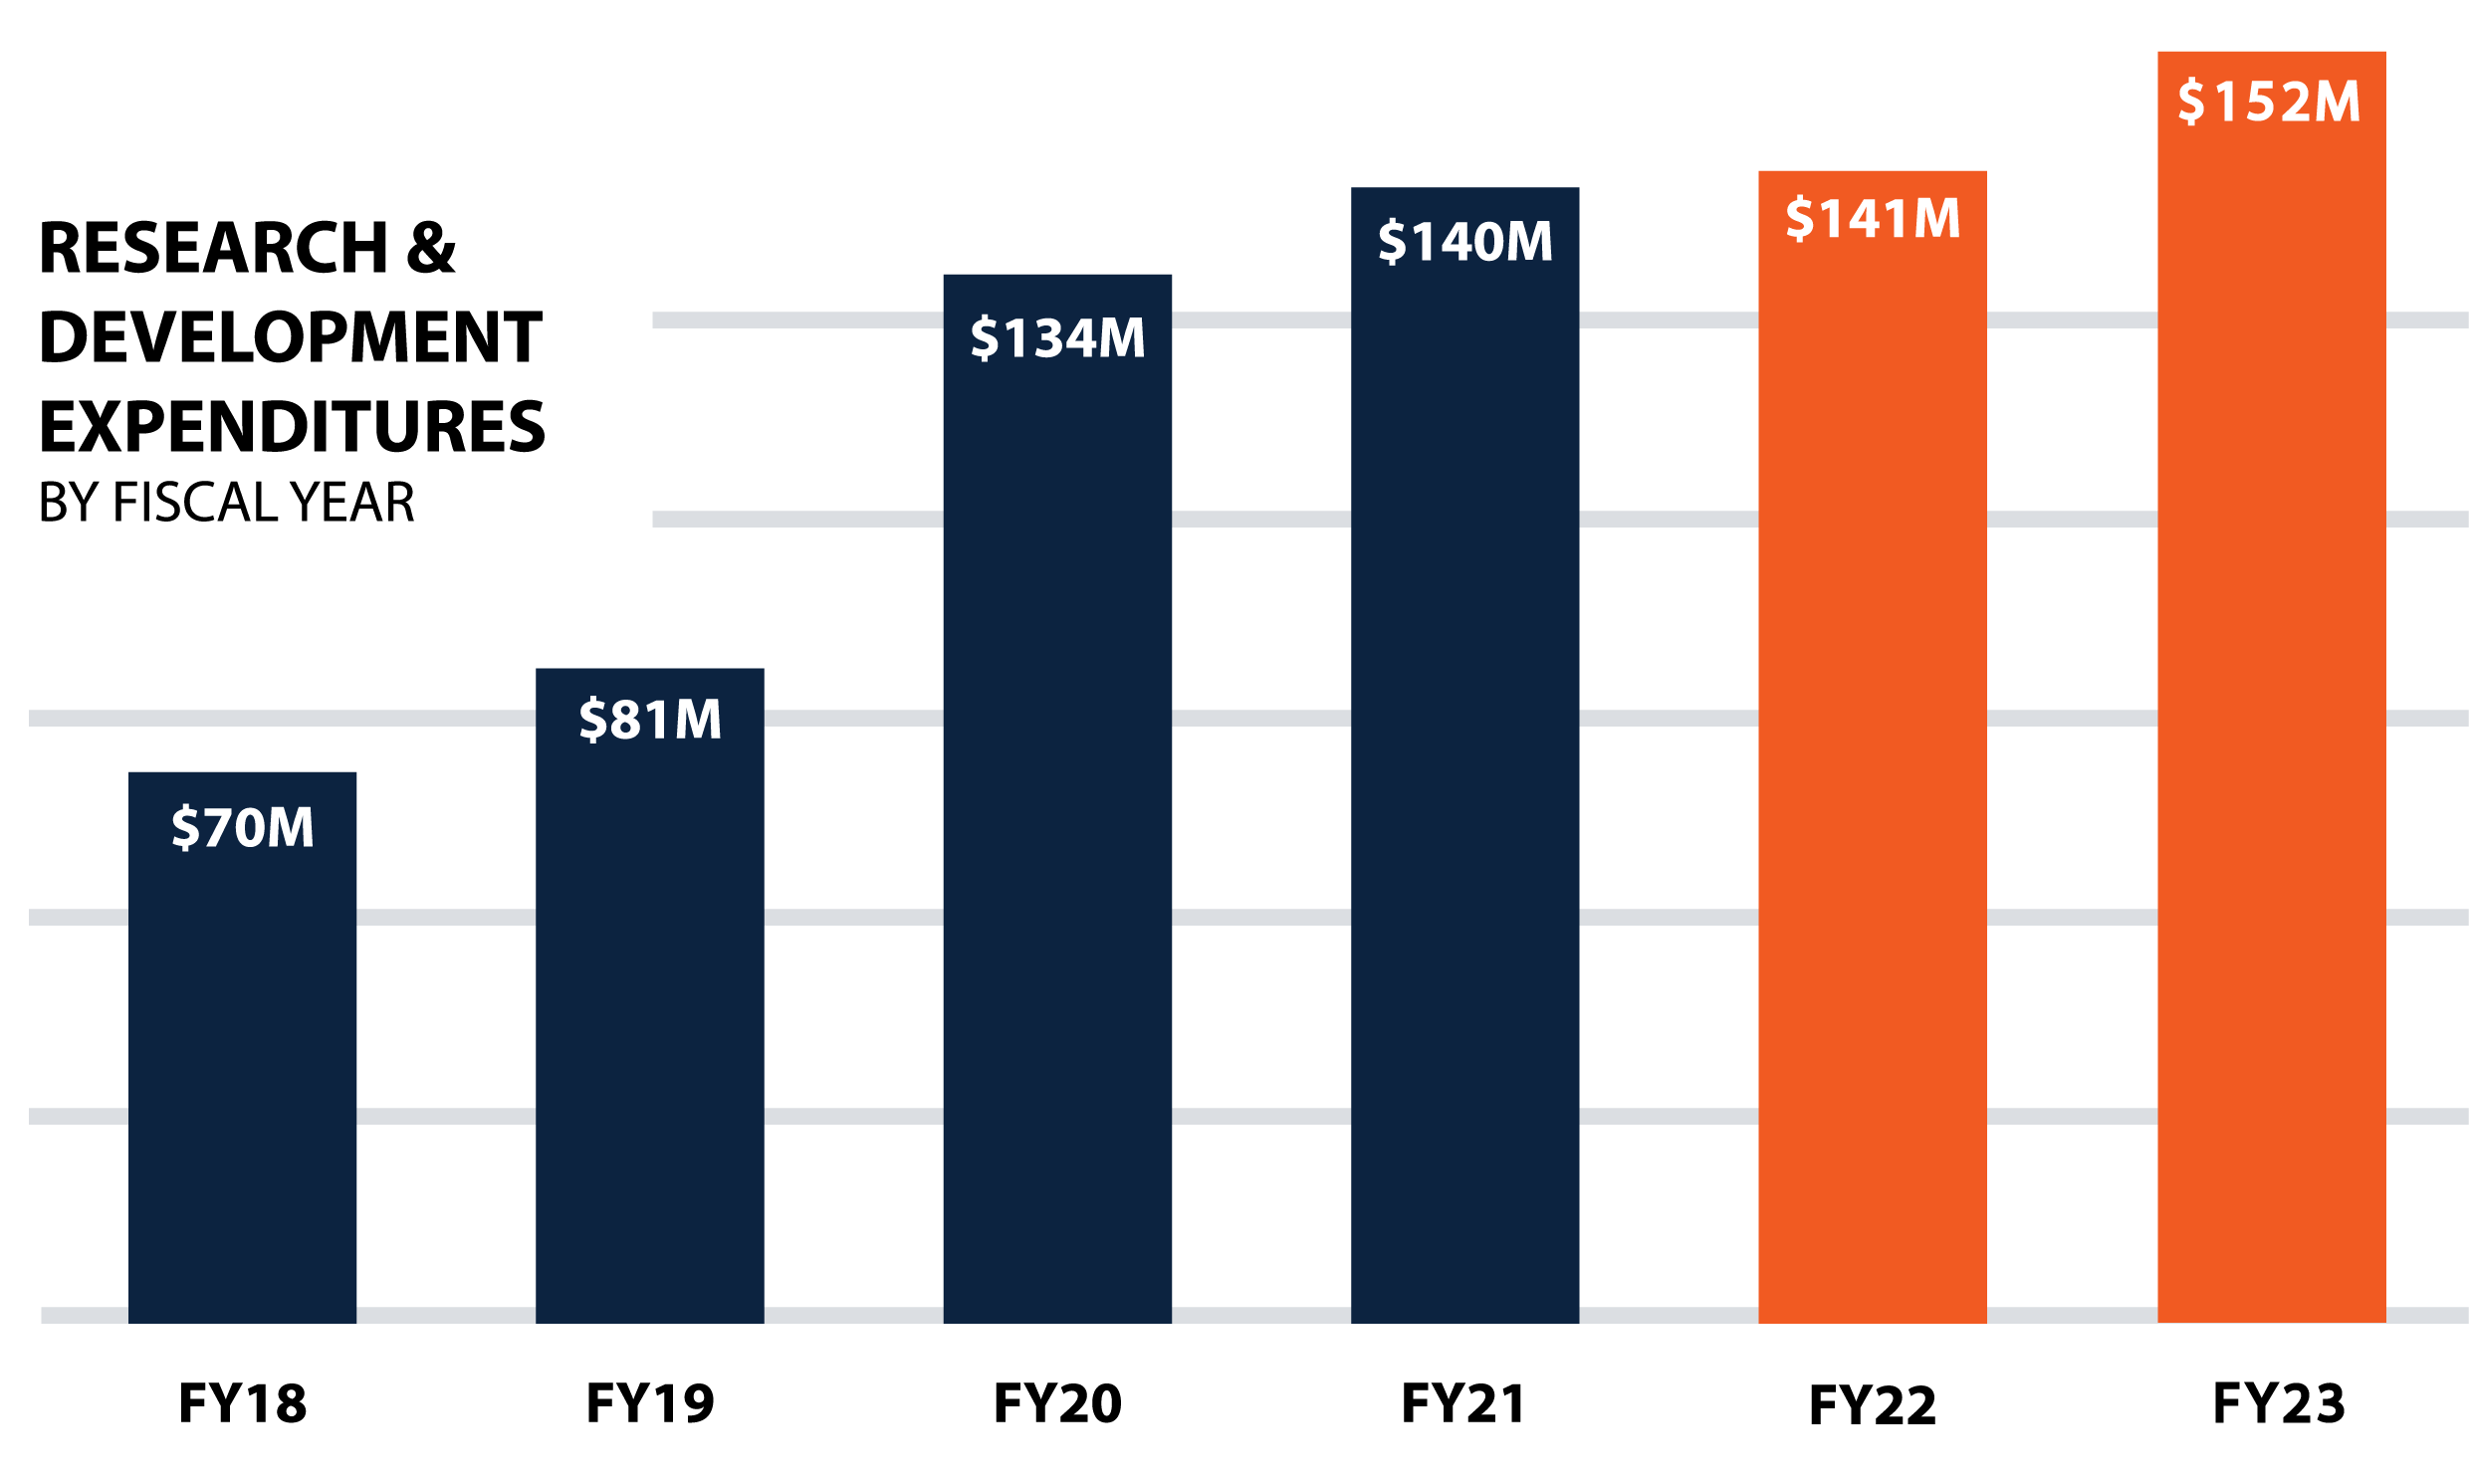 UTSA's research and development expenditures continue to grow, from $70 million in 2018 to over $152 million in 202